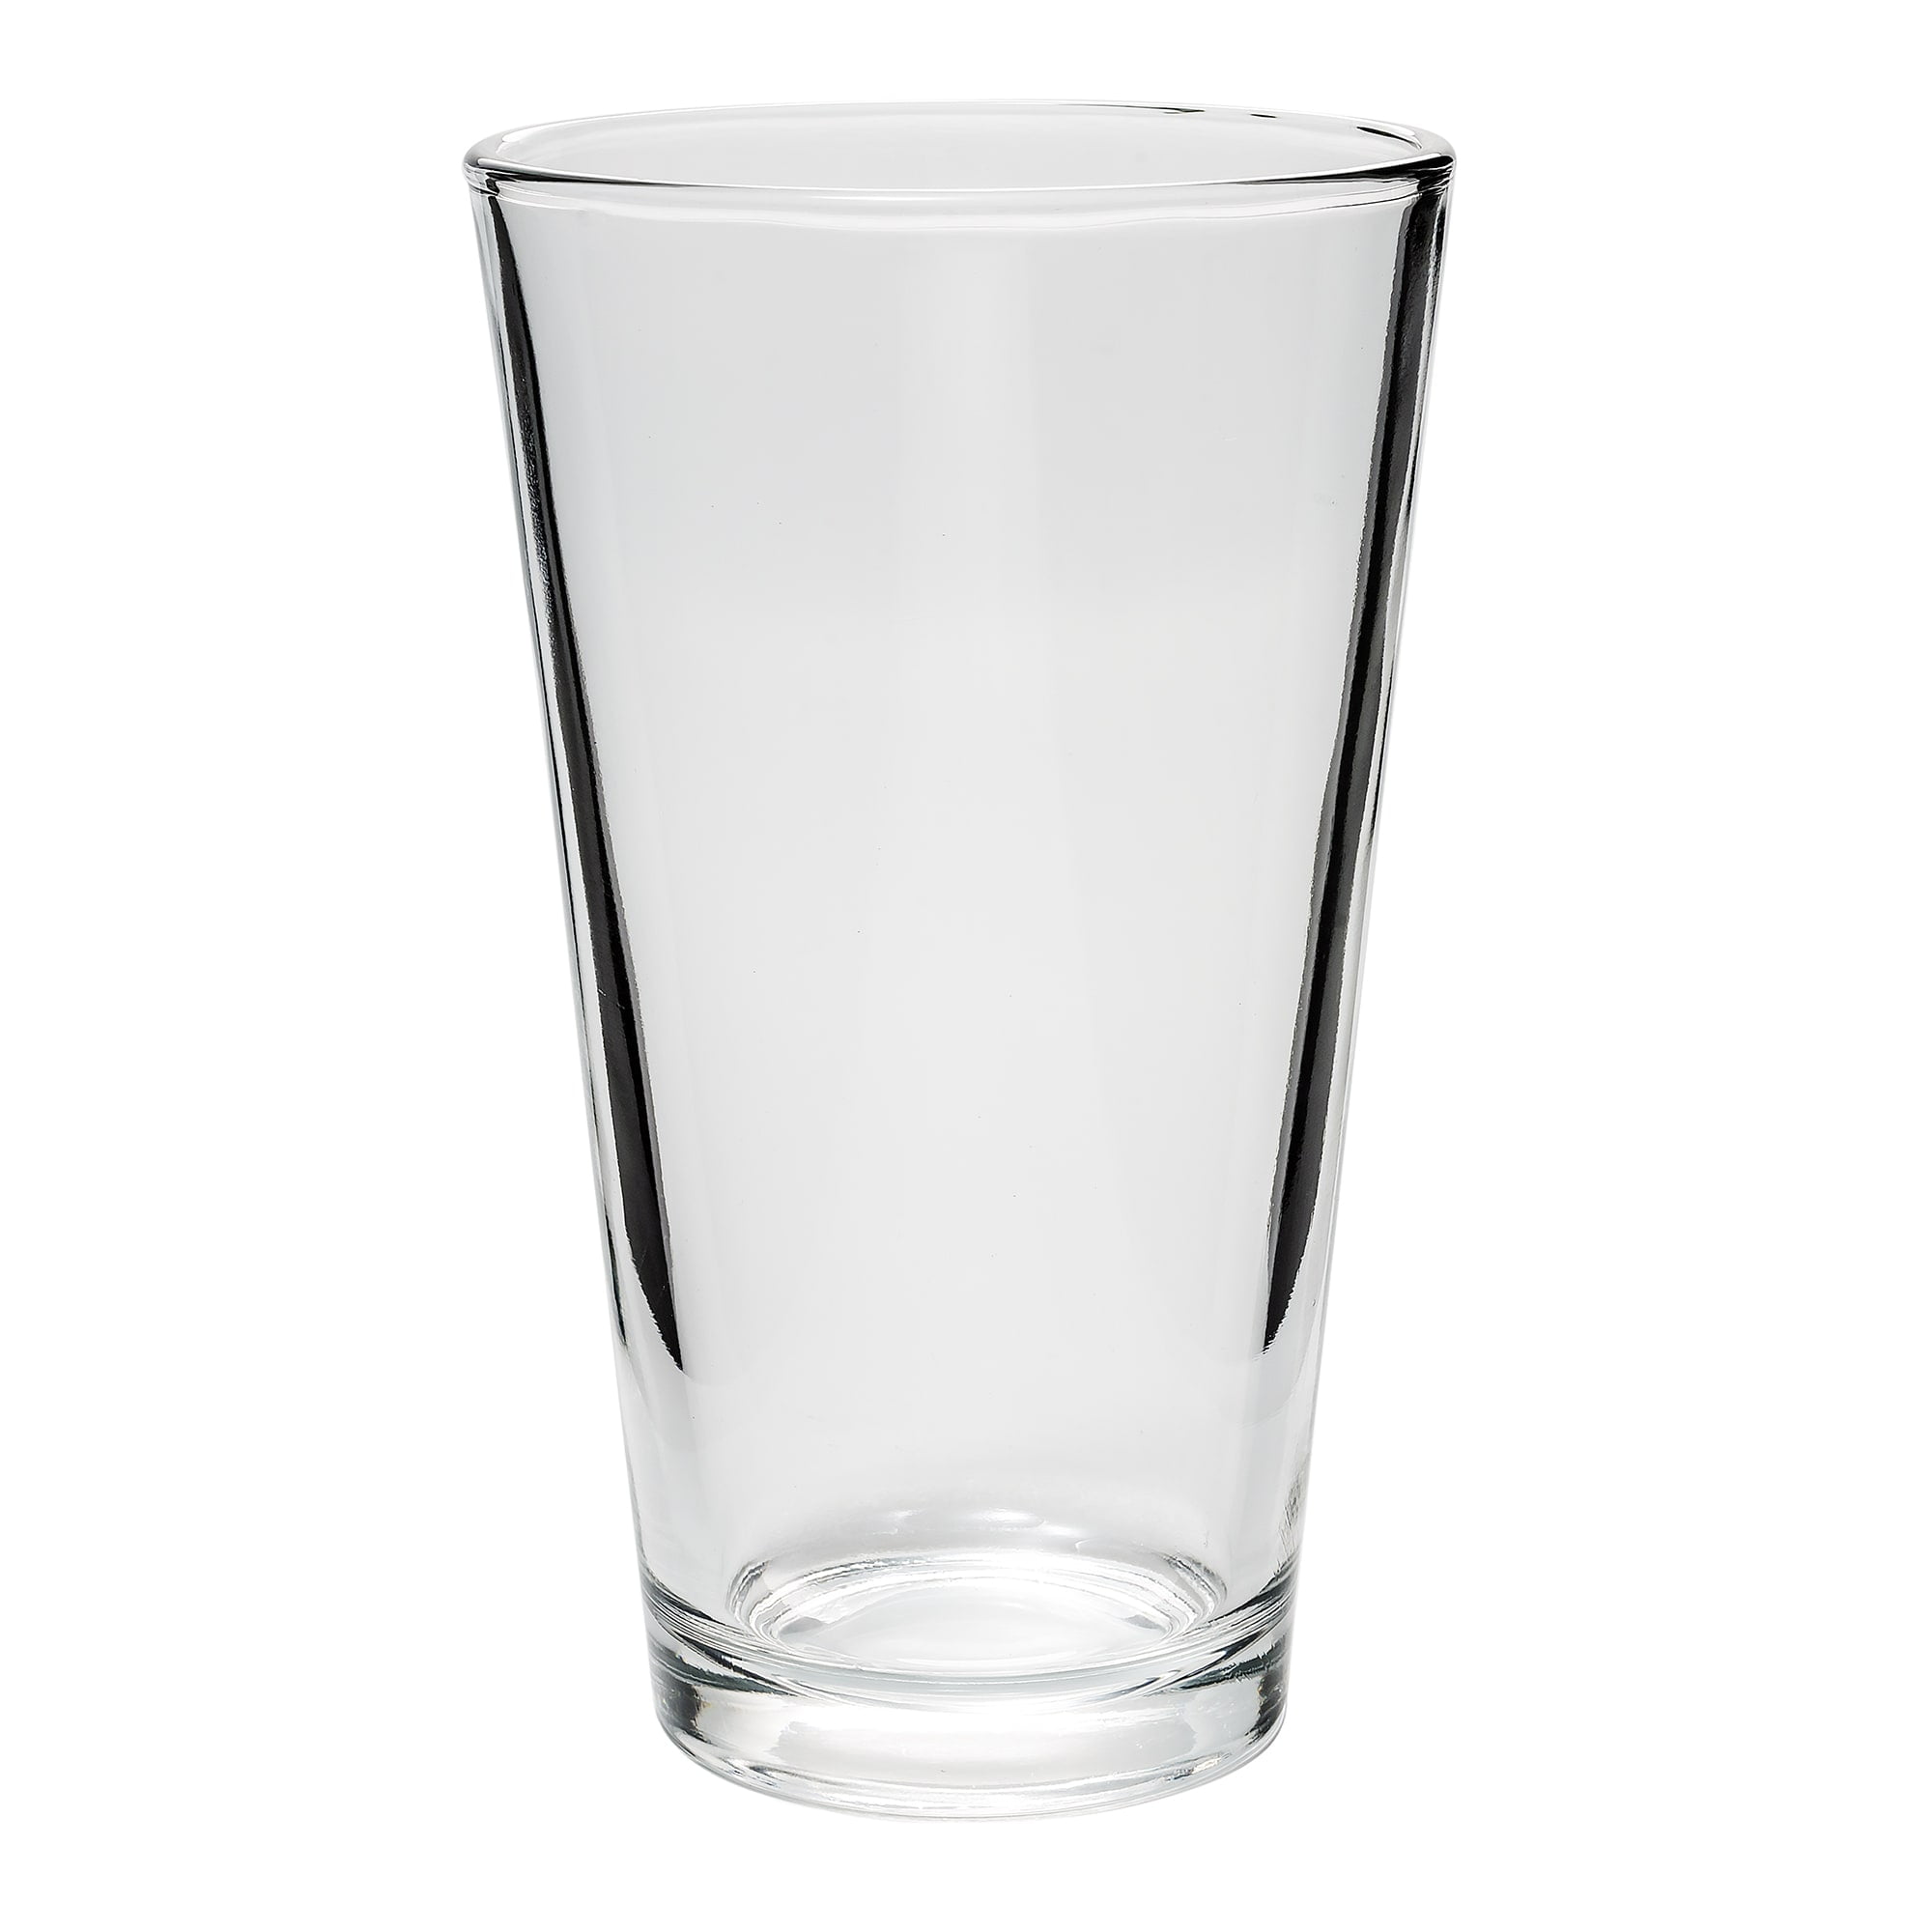 Libbey Mixing Glass 16 Oz Frosted Glass - Restaurant Basics DuraTuff